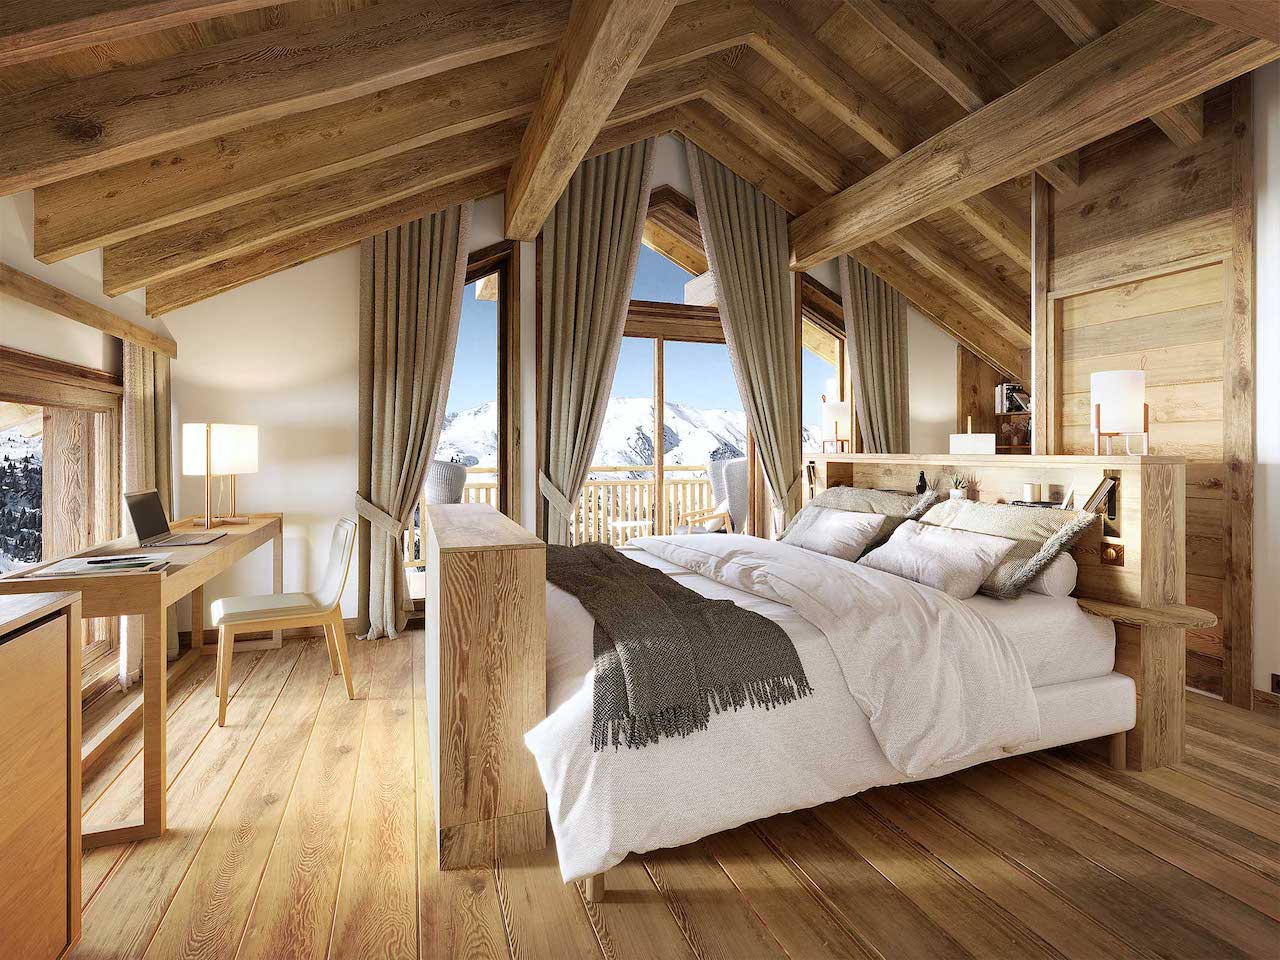 Purple Ski has launched the latest addition to its portfolio, Chalet Harmony in Méribel, a stunning property that sleeps up to 15 in seven bedrooms.